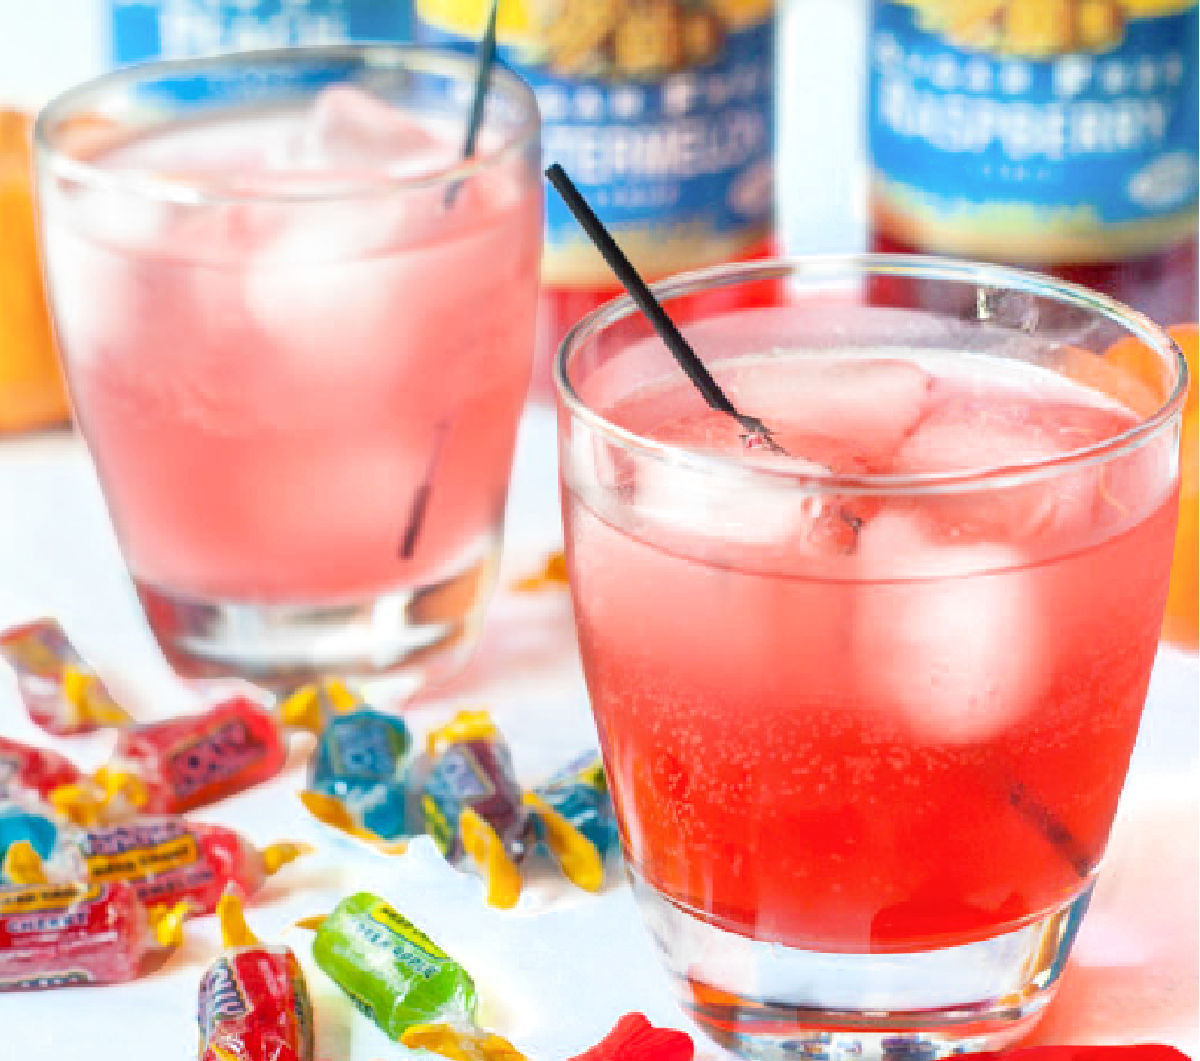 jolly rogers drink and candy 